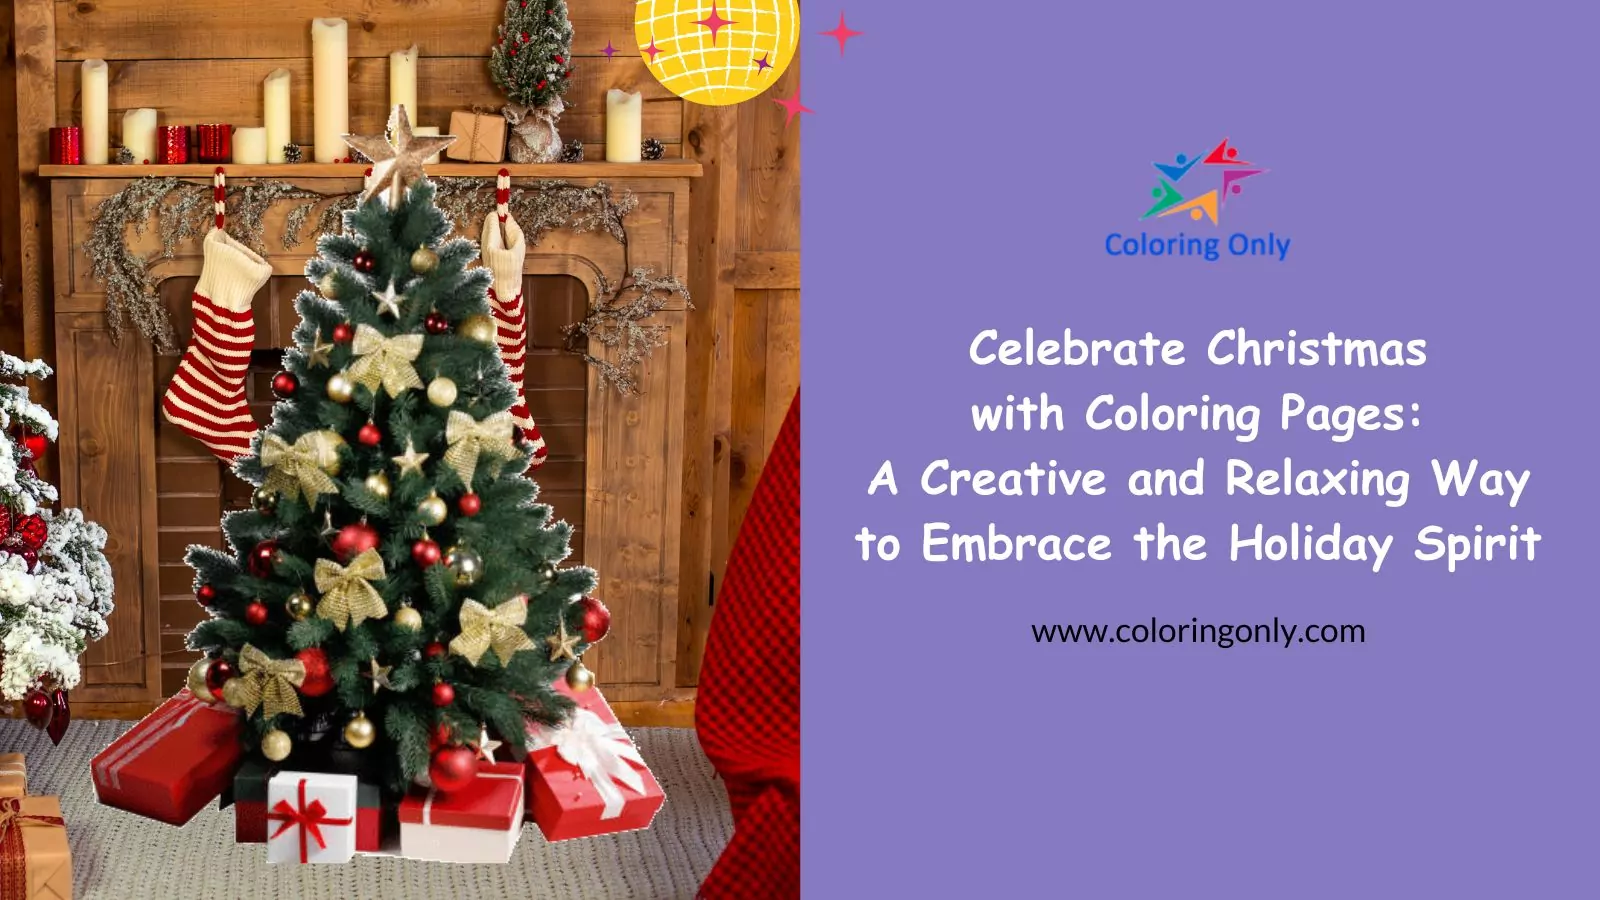 Celebrate Christmas with Coloring Pages: A Creative and Relaxing Way to Embrace the Holiday Spirit